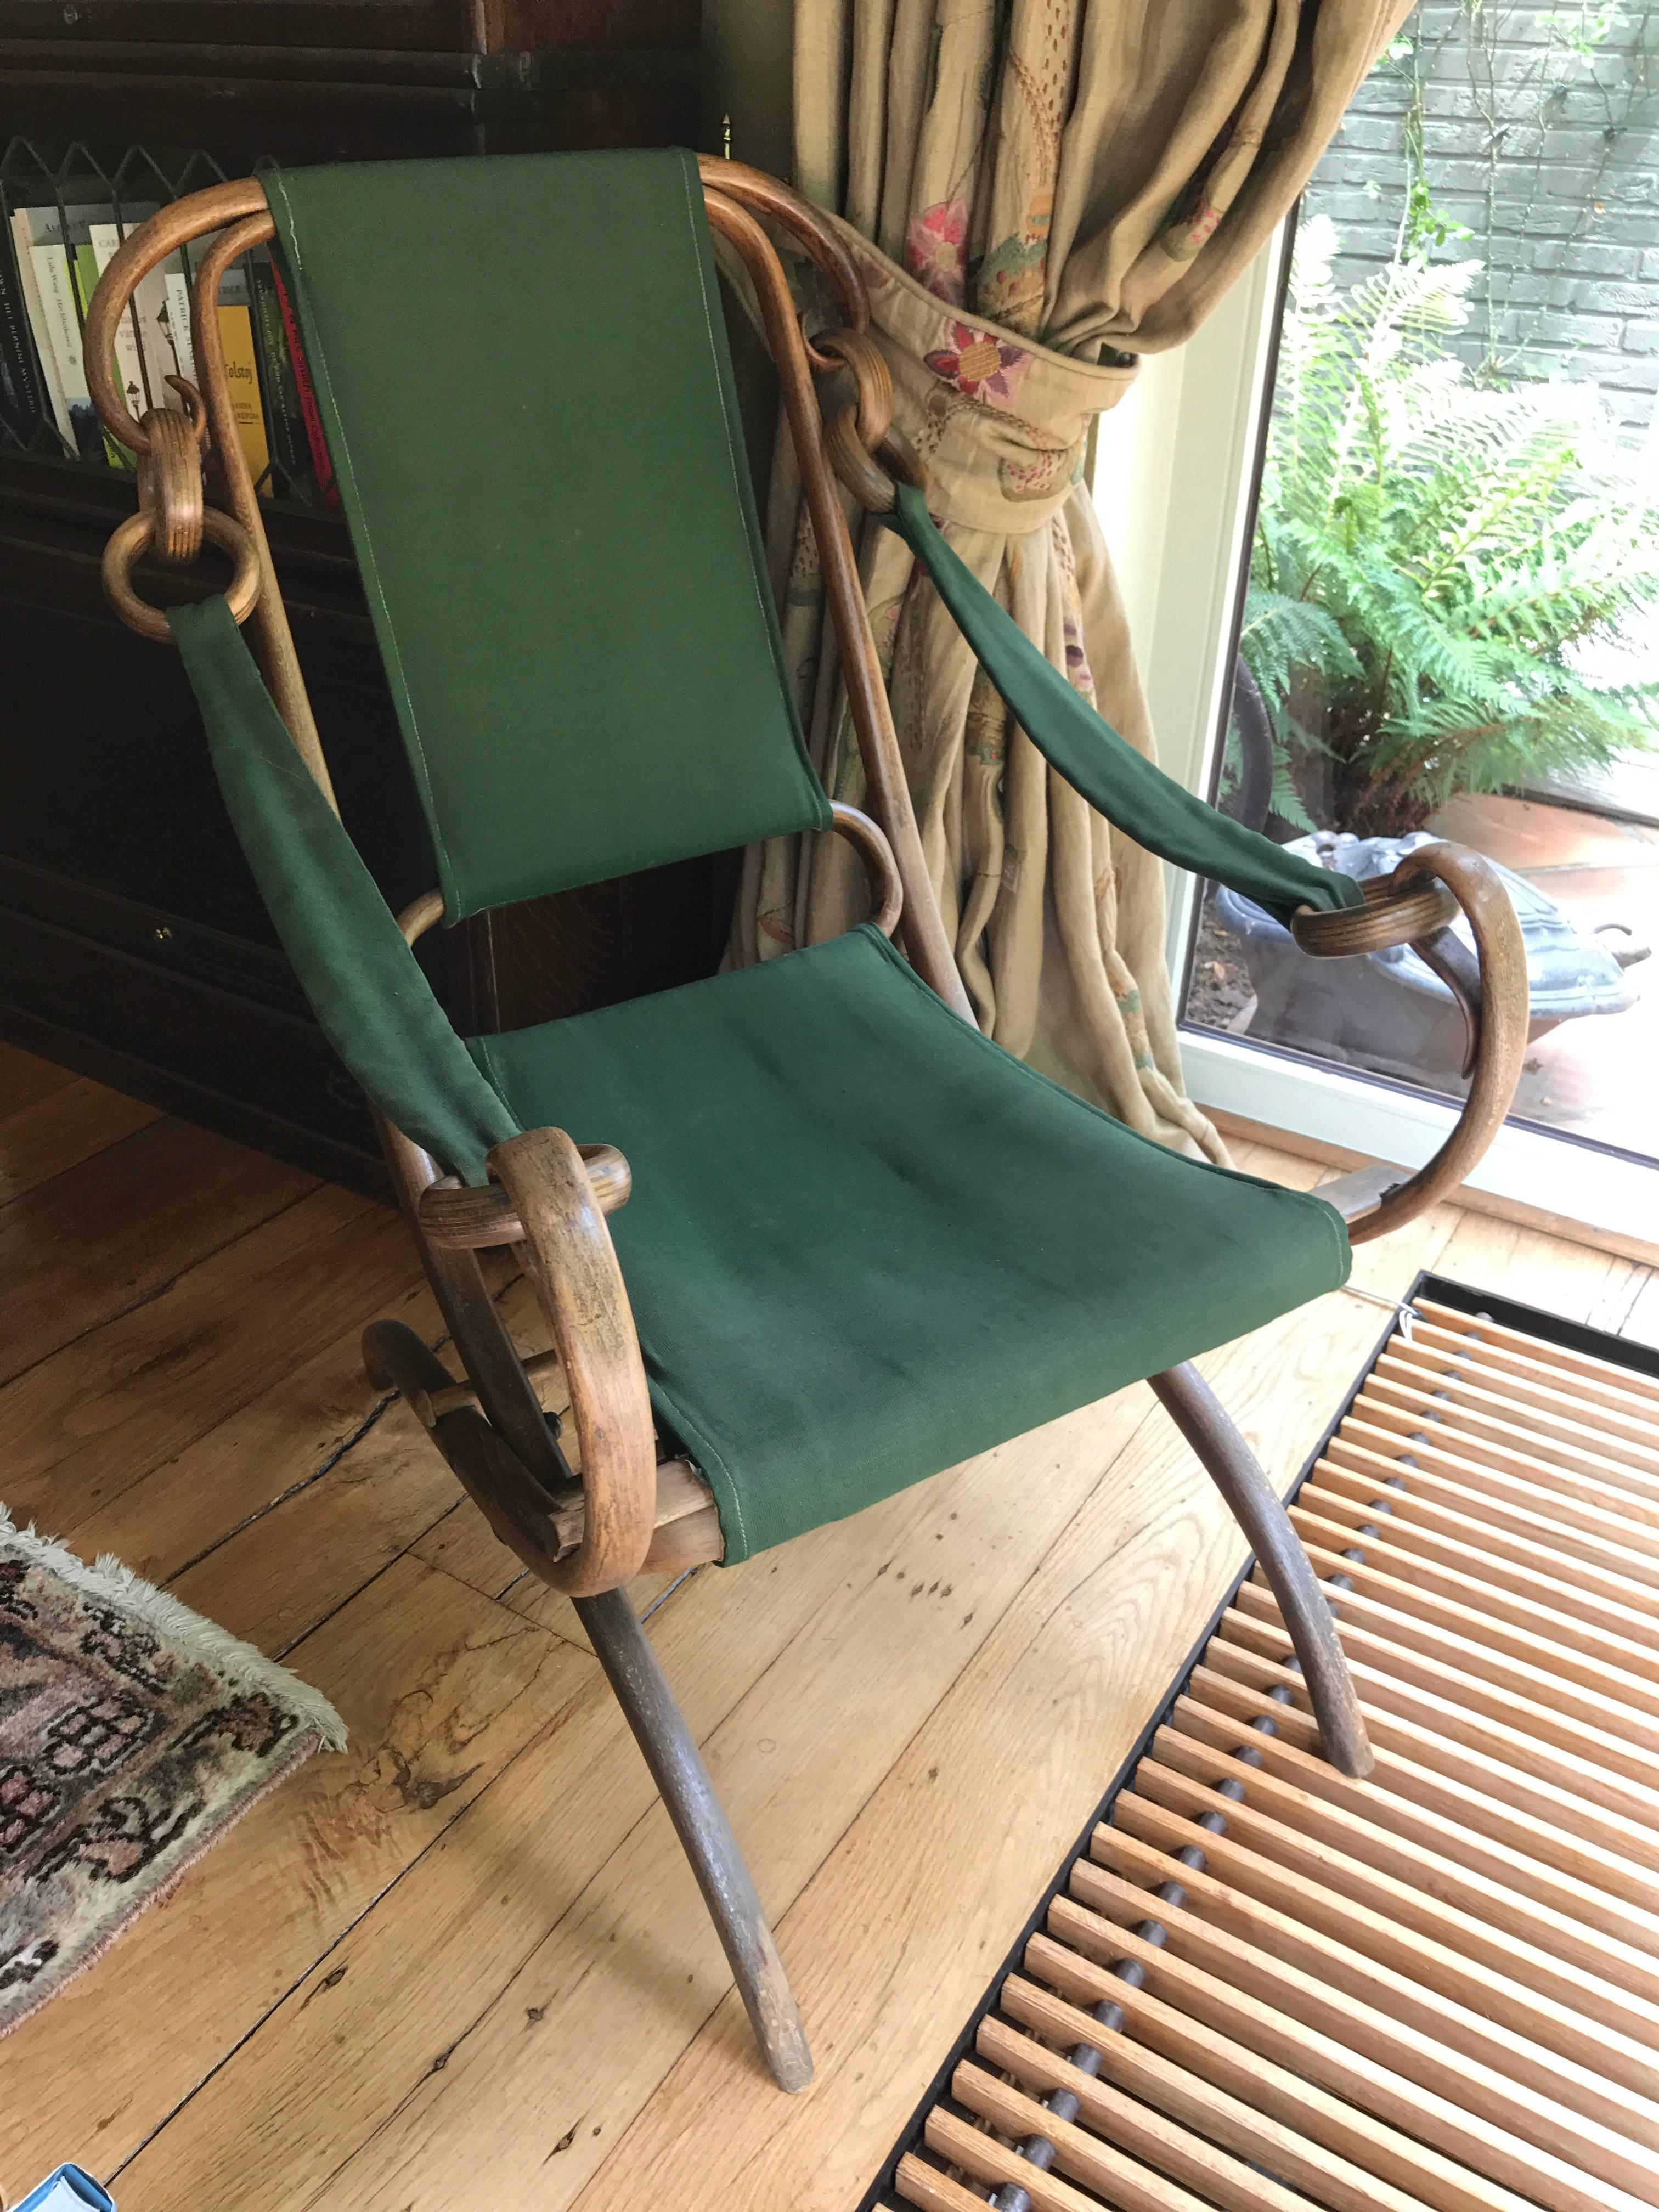 Thonet folding chair, circa 1890
Klapp Fauteuil nr 6310
Green re-upholstered 
sold by Christies Amsterdam in 1995
Perfect condition 
Beechwood
Measures: 60 x 75 x 95 x 42.

  